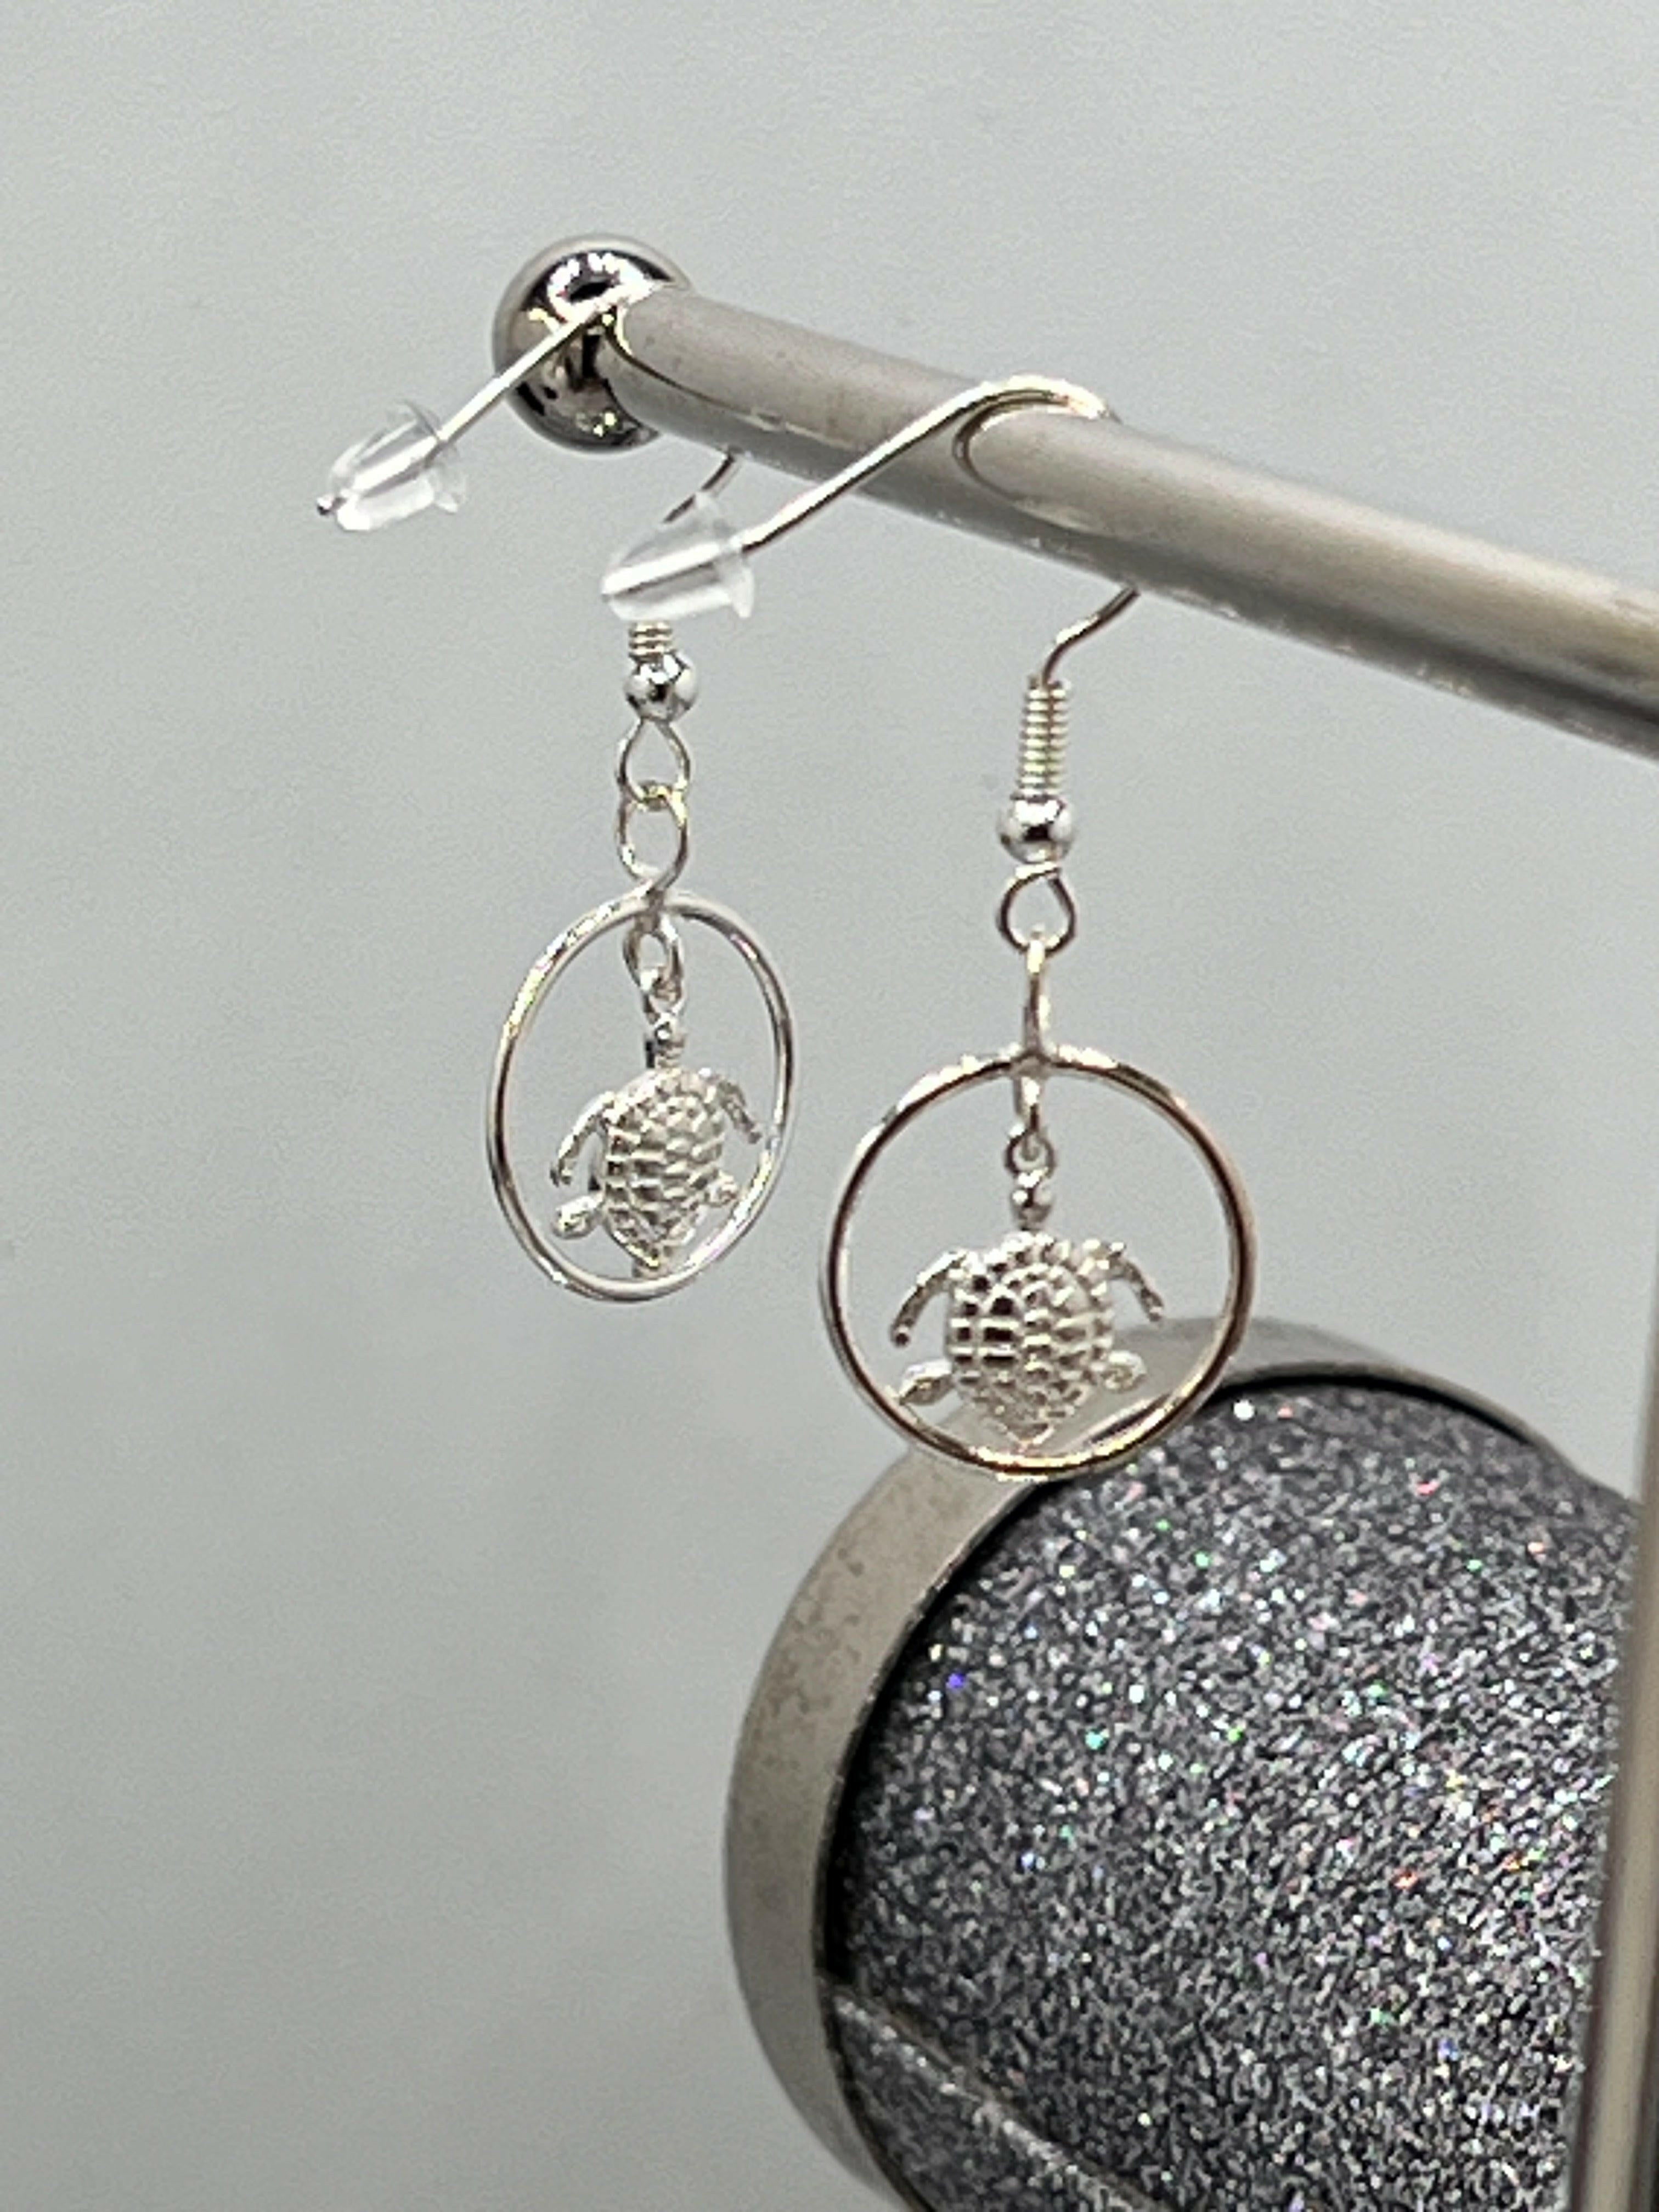 Bec Sue Jewelry Shop Jewelry sterling silver / all sterling silver turtle and wire Sterling Silver Sea Turtle Earrings, Turtle Earrings Tags 723